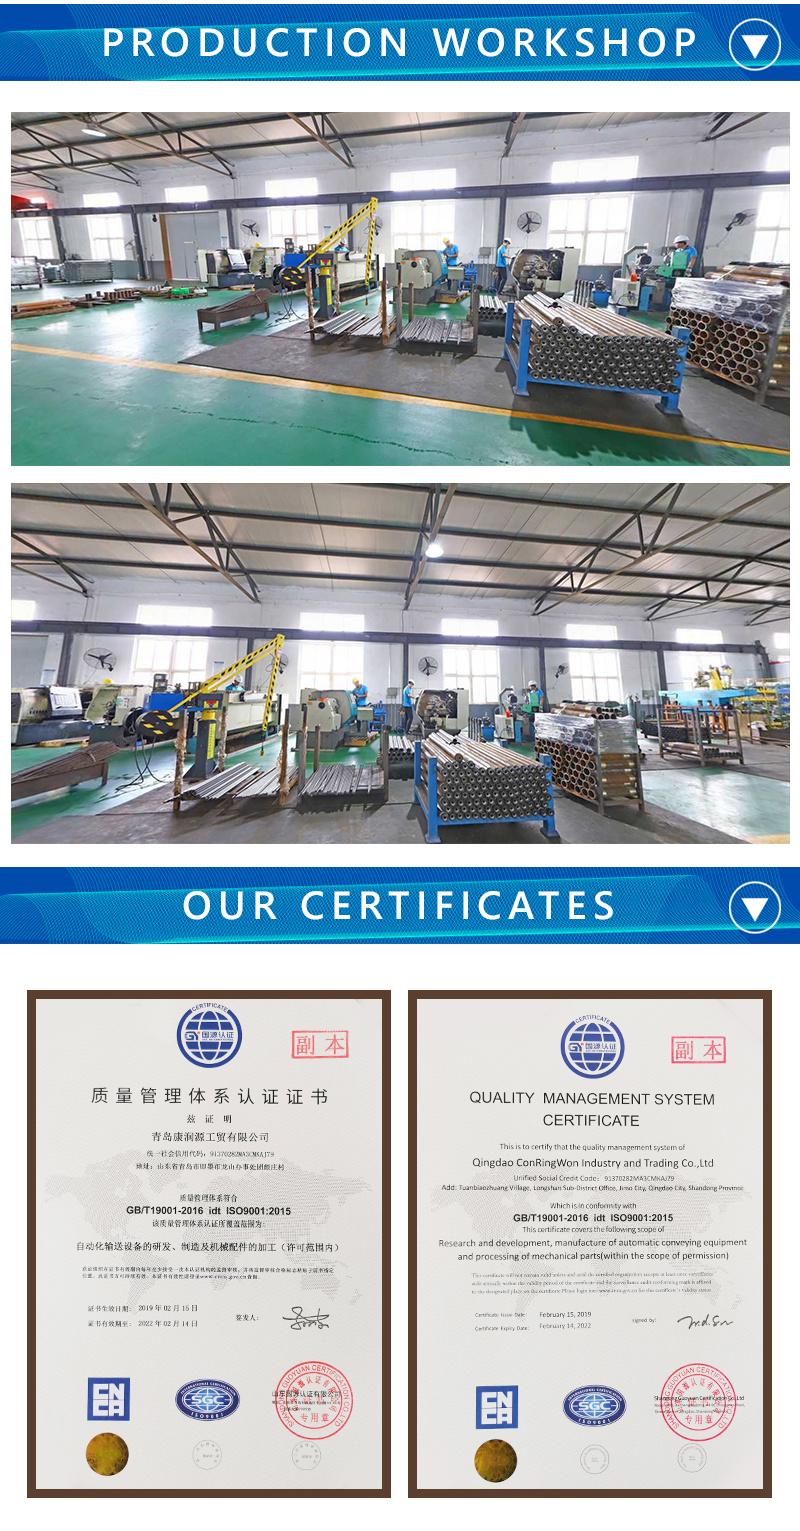 China Manufacturer Stainless Steel Universal Gravity Conveyor Roller